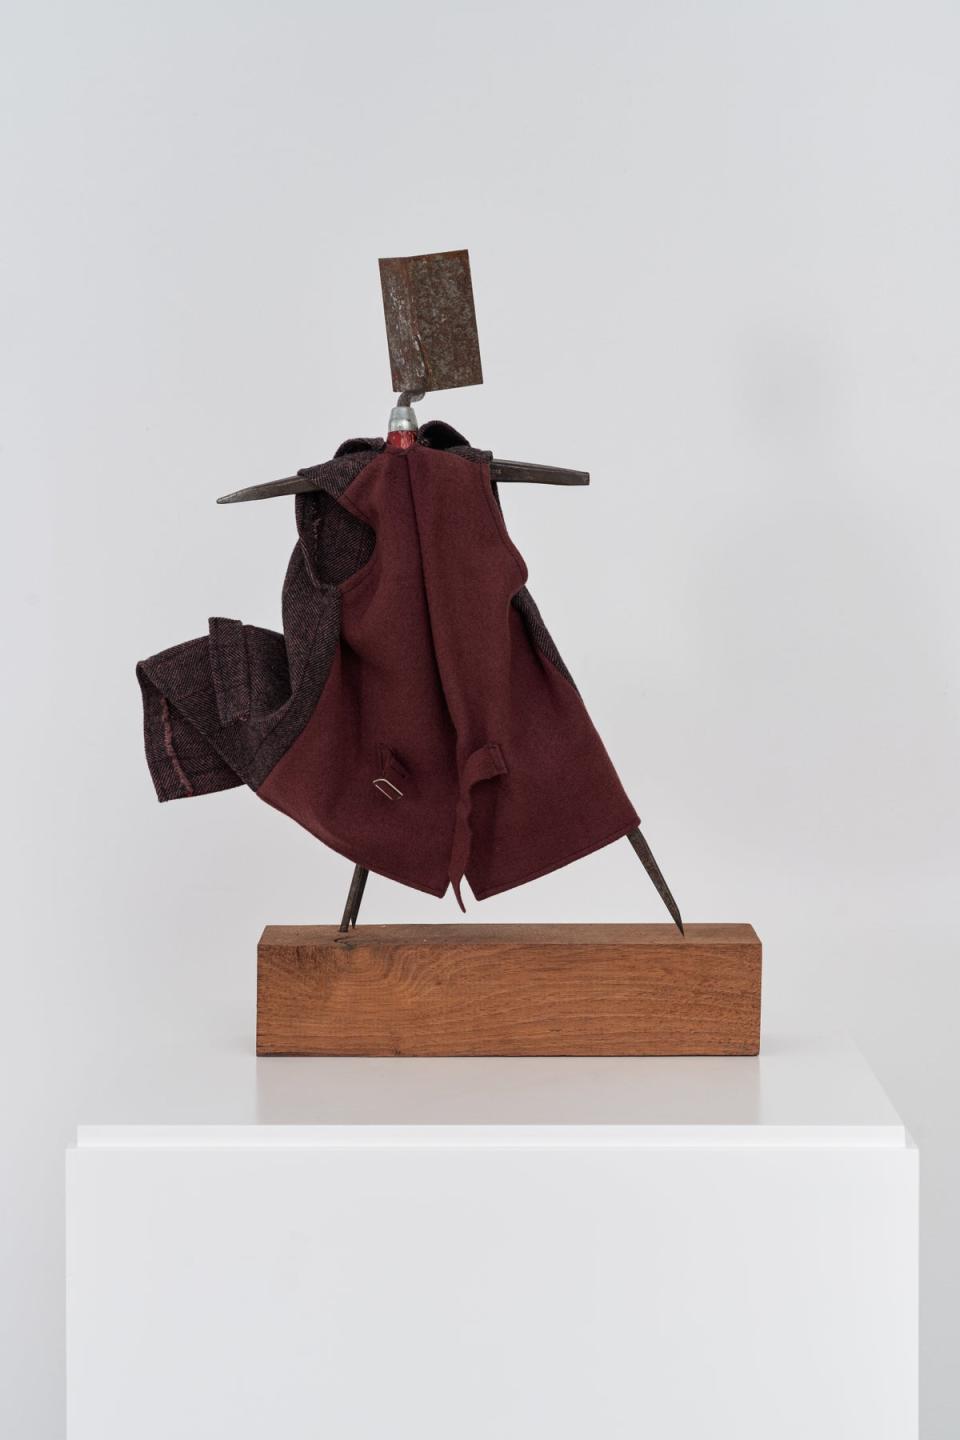 Puppet I from Oh to Believe in Another World 2021 - 2022 (William Kentridge, courtesy of Goodman Gallery)